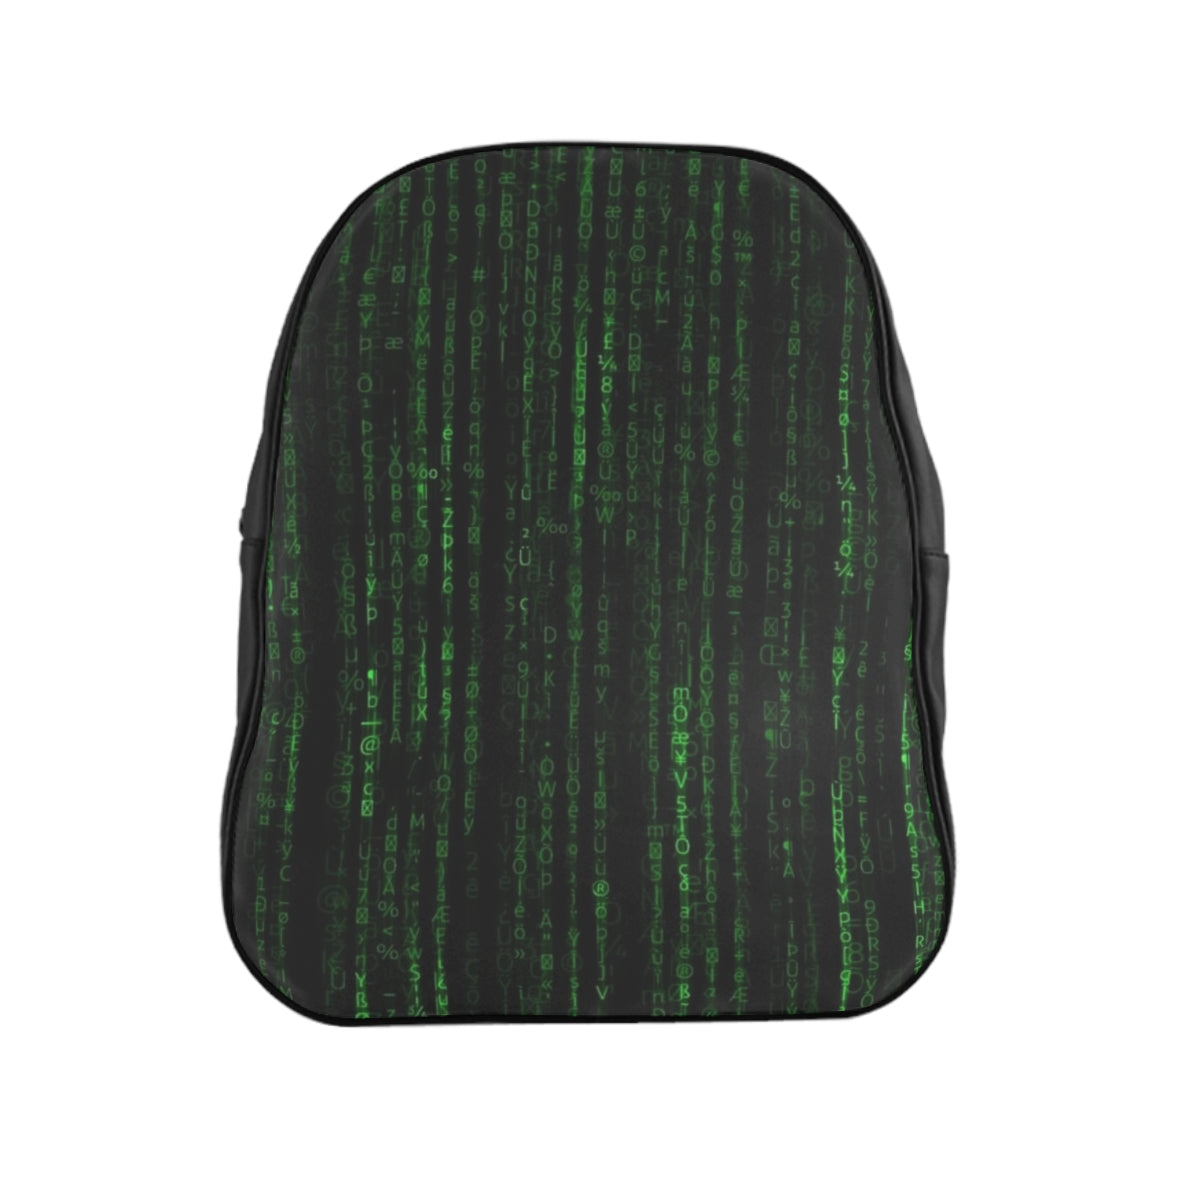 Getrott The Matrix Reloaded Resurrections Revolutions Trilogy Matrixmovies Glitch in the Matrix Animatrix Keanu Reeves Poster School Backpack Carry-On Travel Check Luggage 4-Wheel Spinner Suitcase Bag Multiple Colors and Sizes-Bags-Geotrott